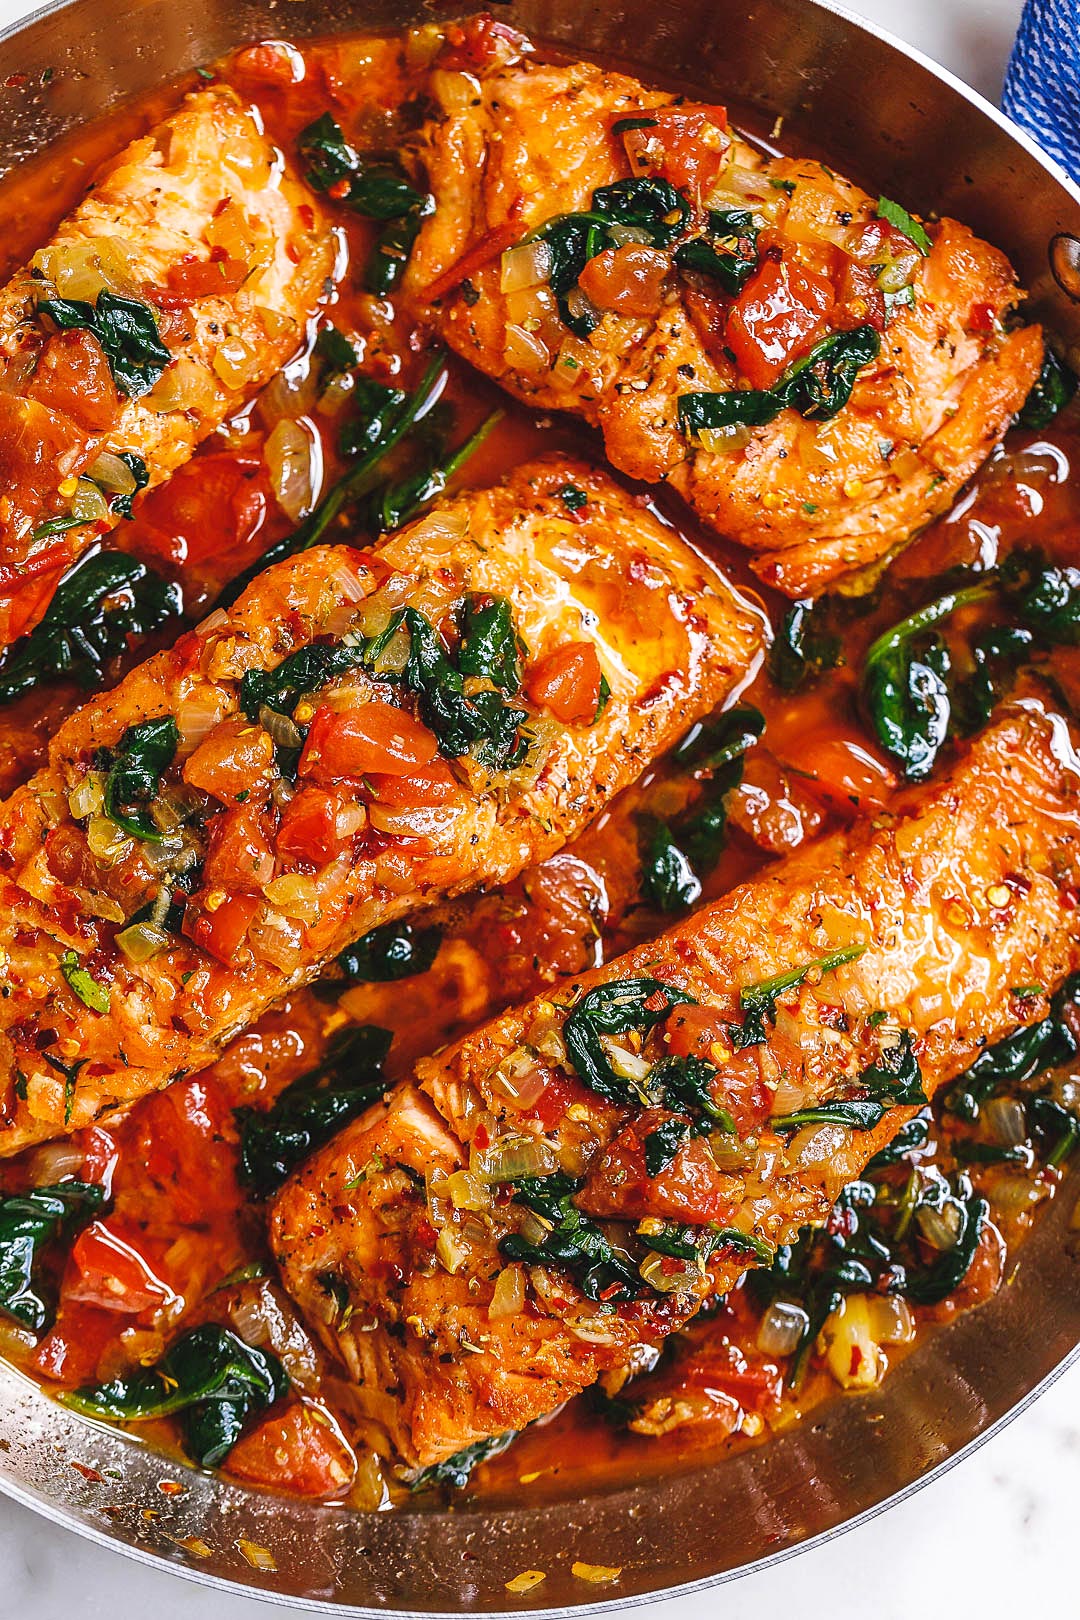 Tuscan Garlic Salmon Skillet with Spinach and Tomato